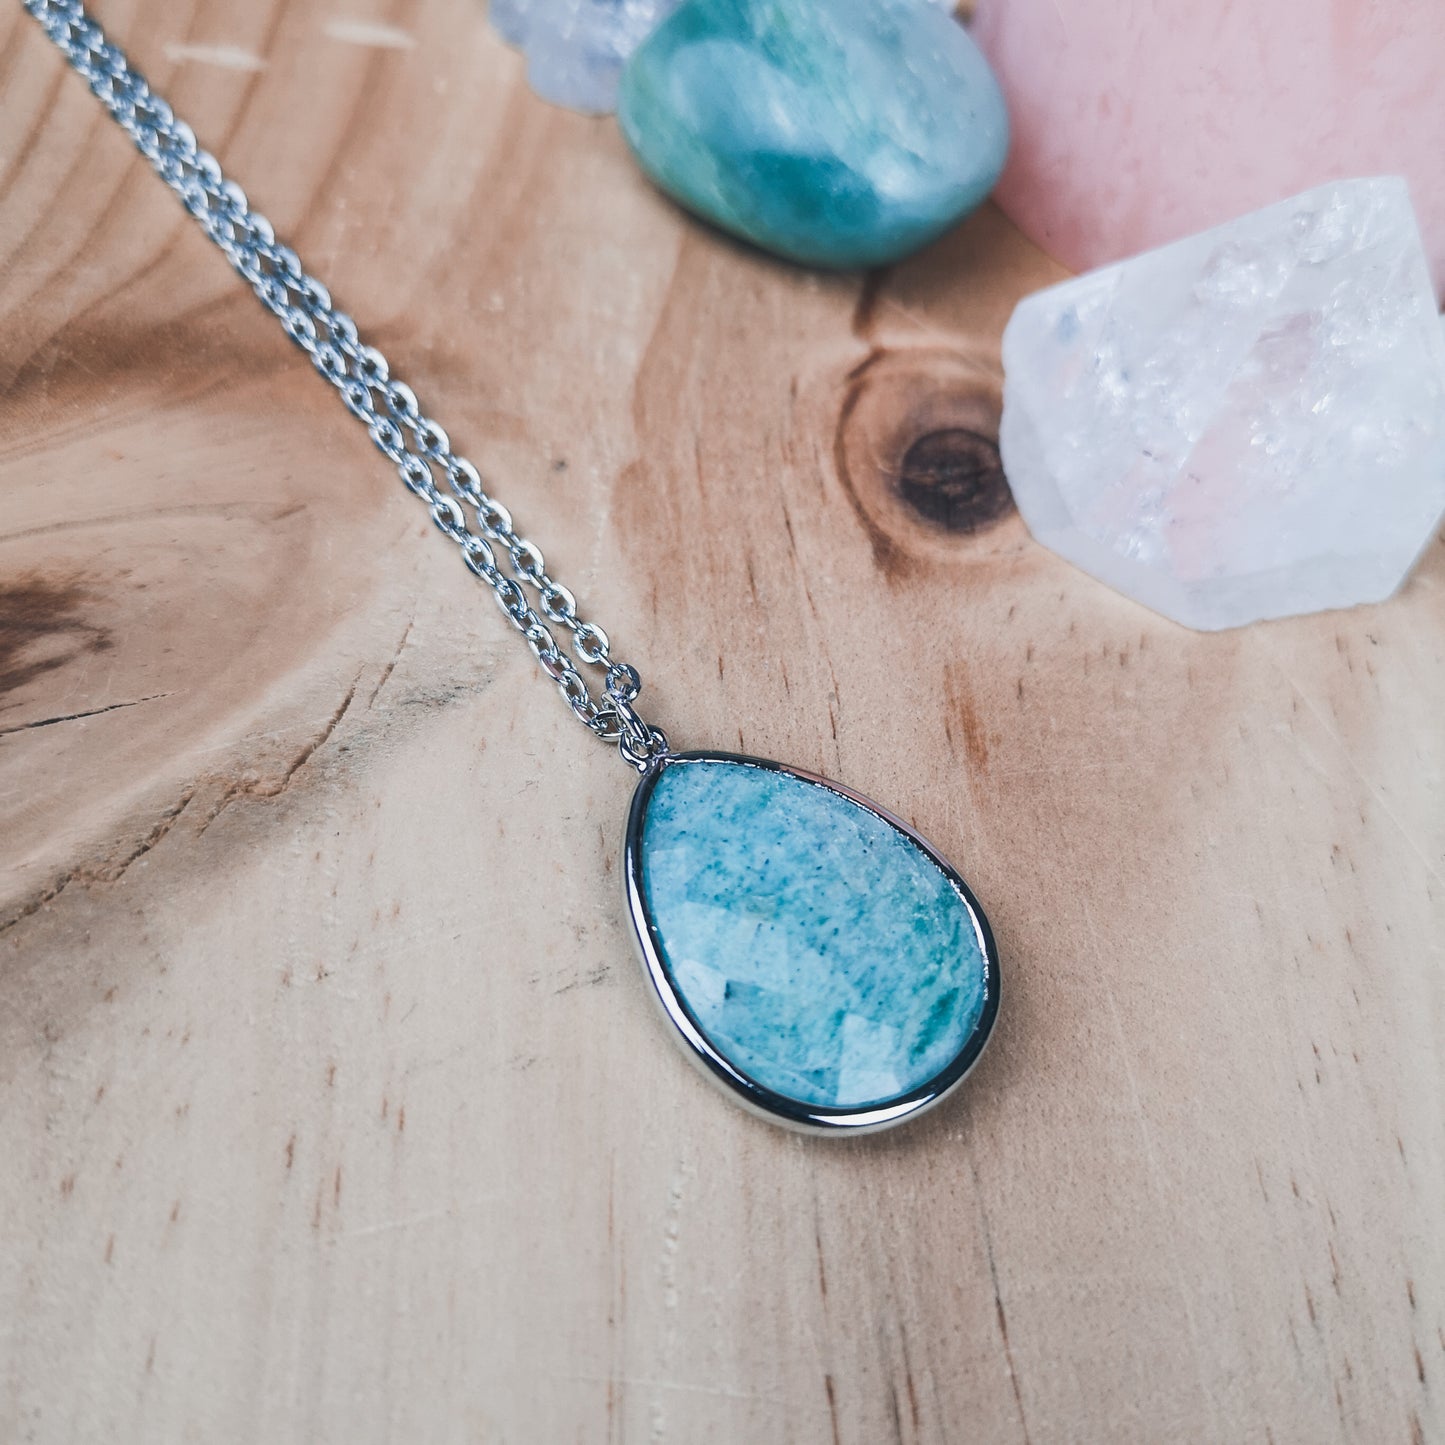 Faceted amazonite gemstone pendant necklace - The French Witch shop